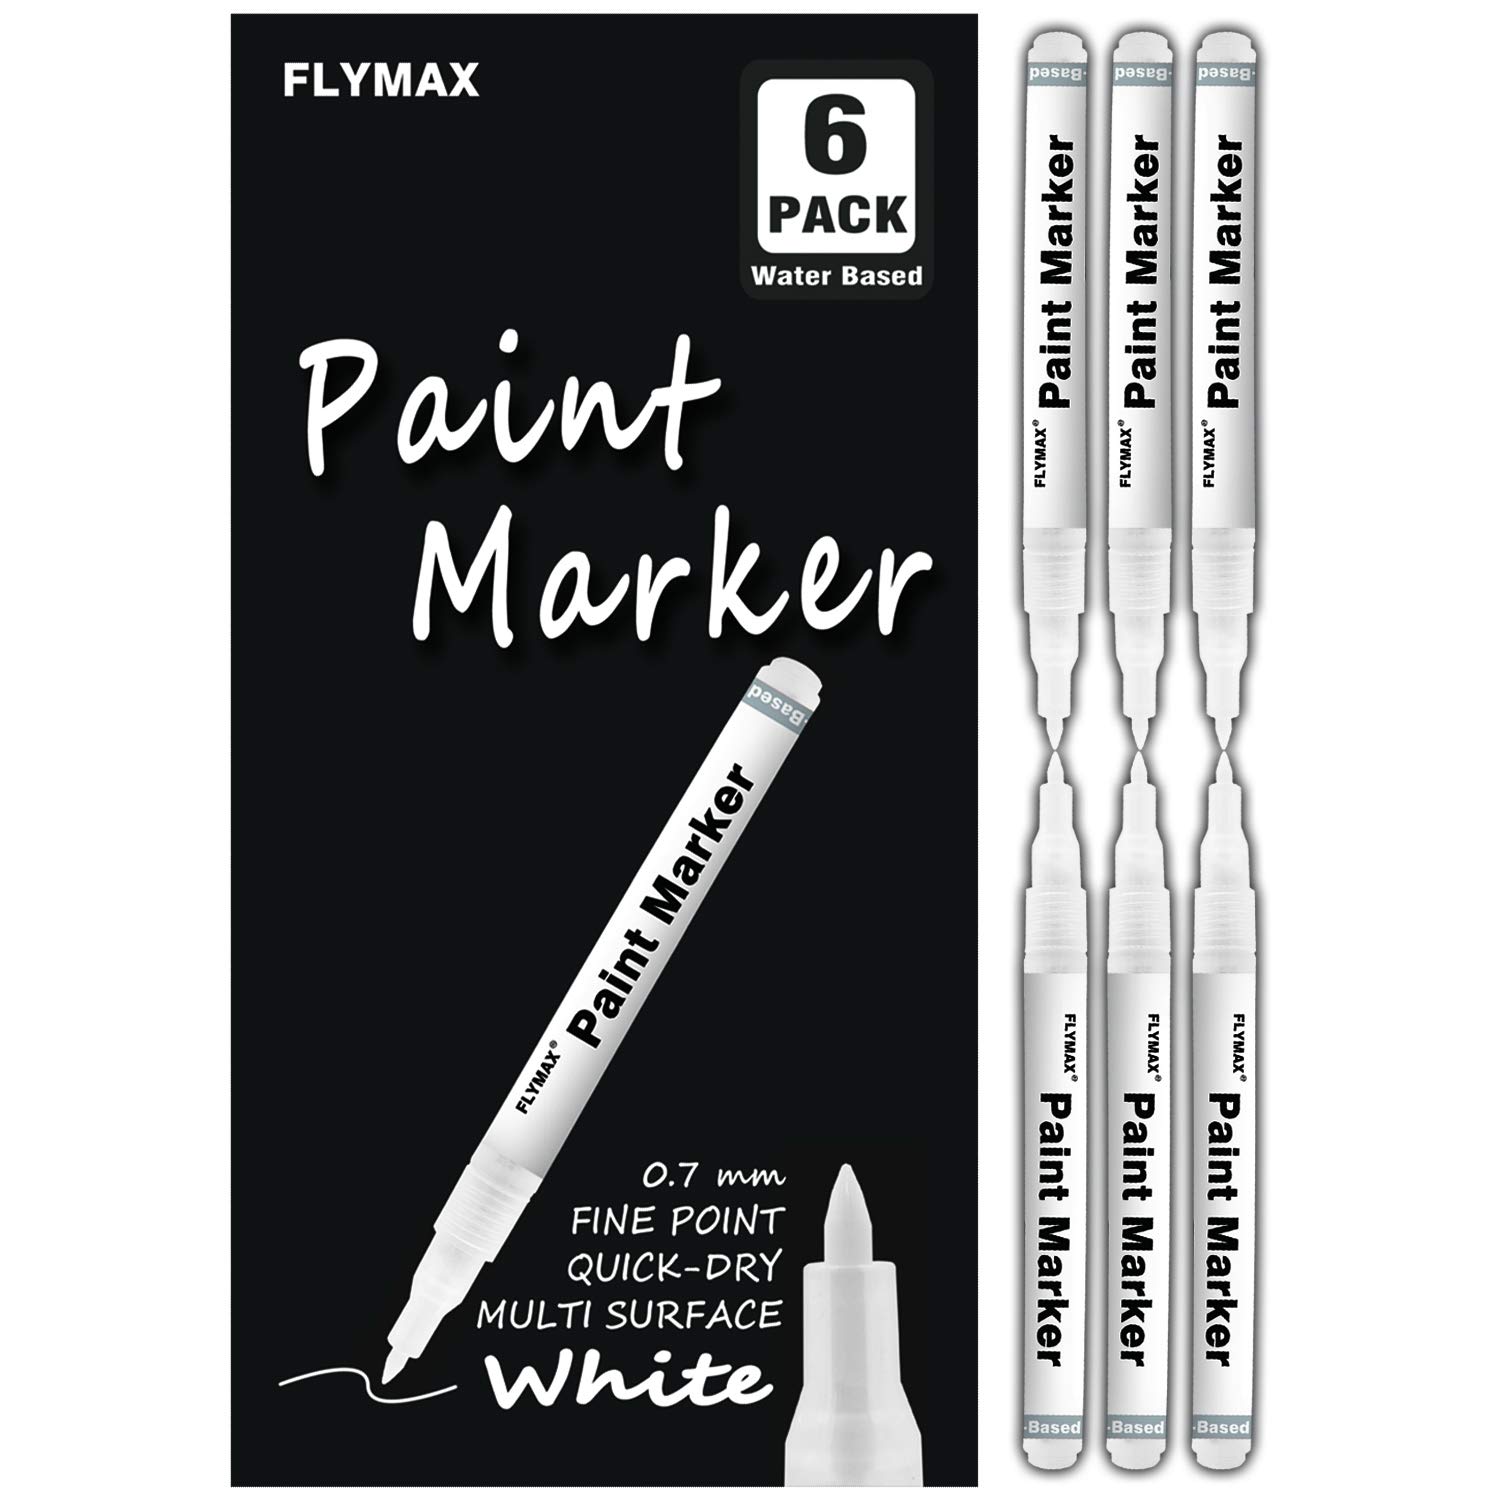 FLYMAX White Paint Pen 6 Pack 0.7mm Acrylic White Permanent Marker